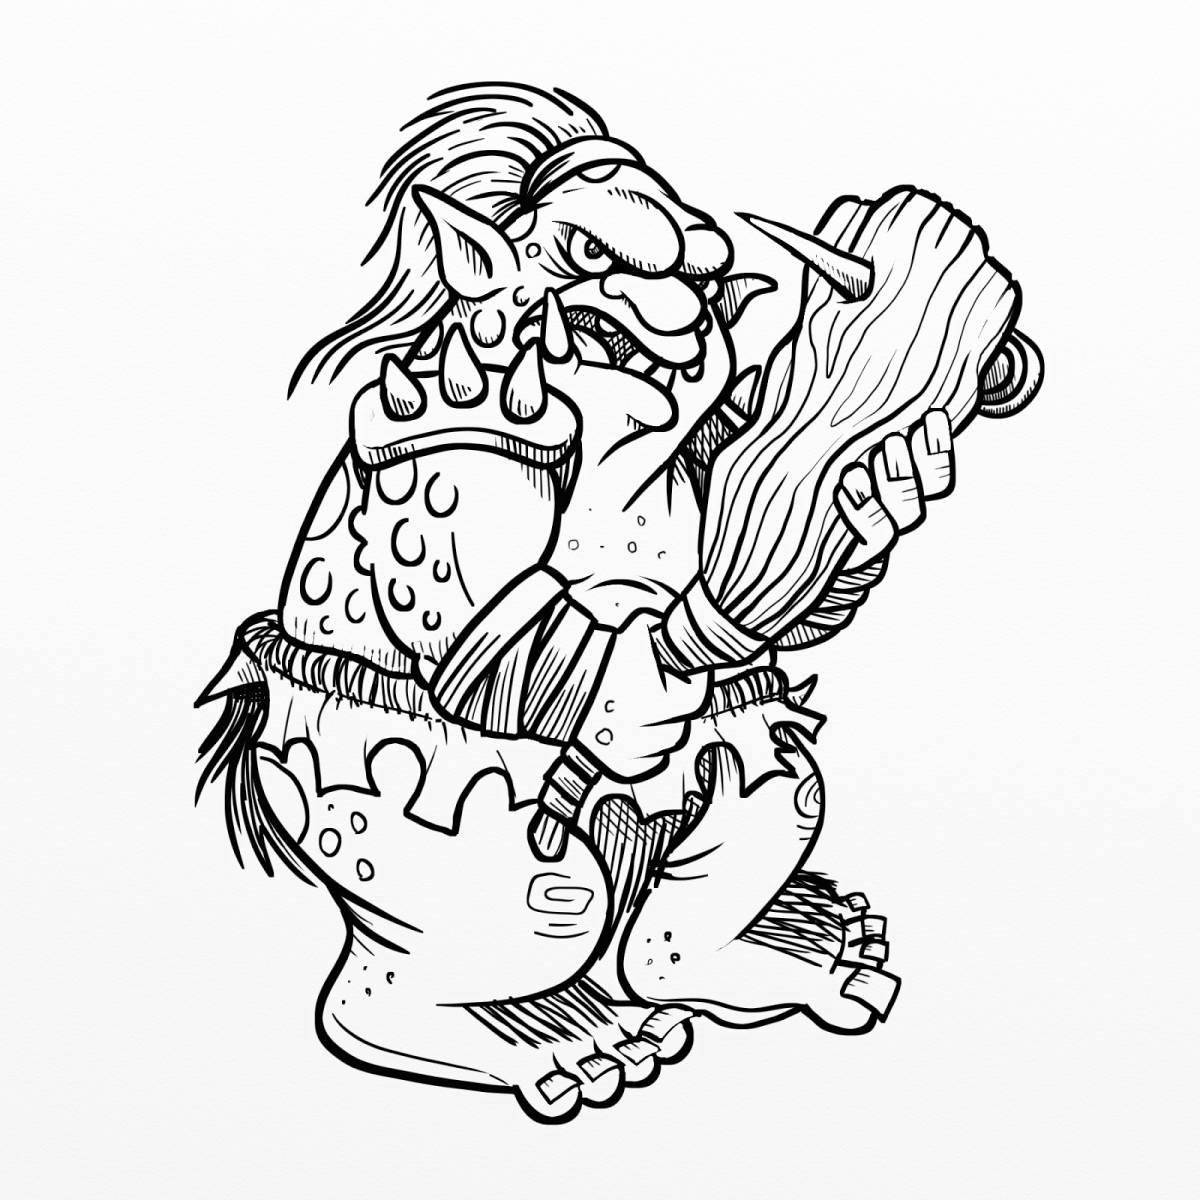 Junior Goblin Animated Coloring Page